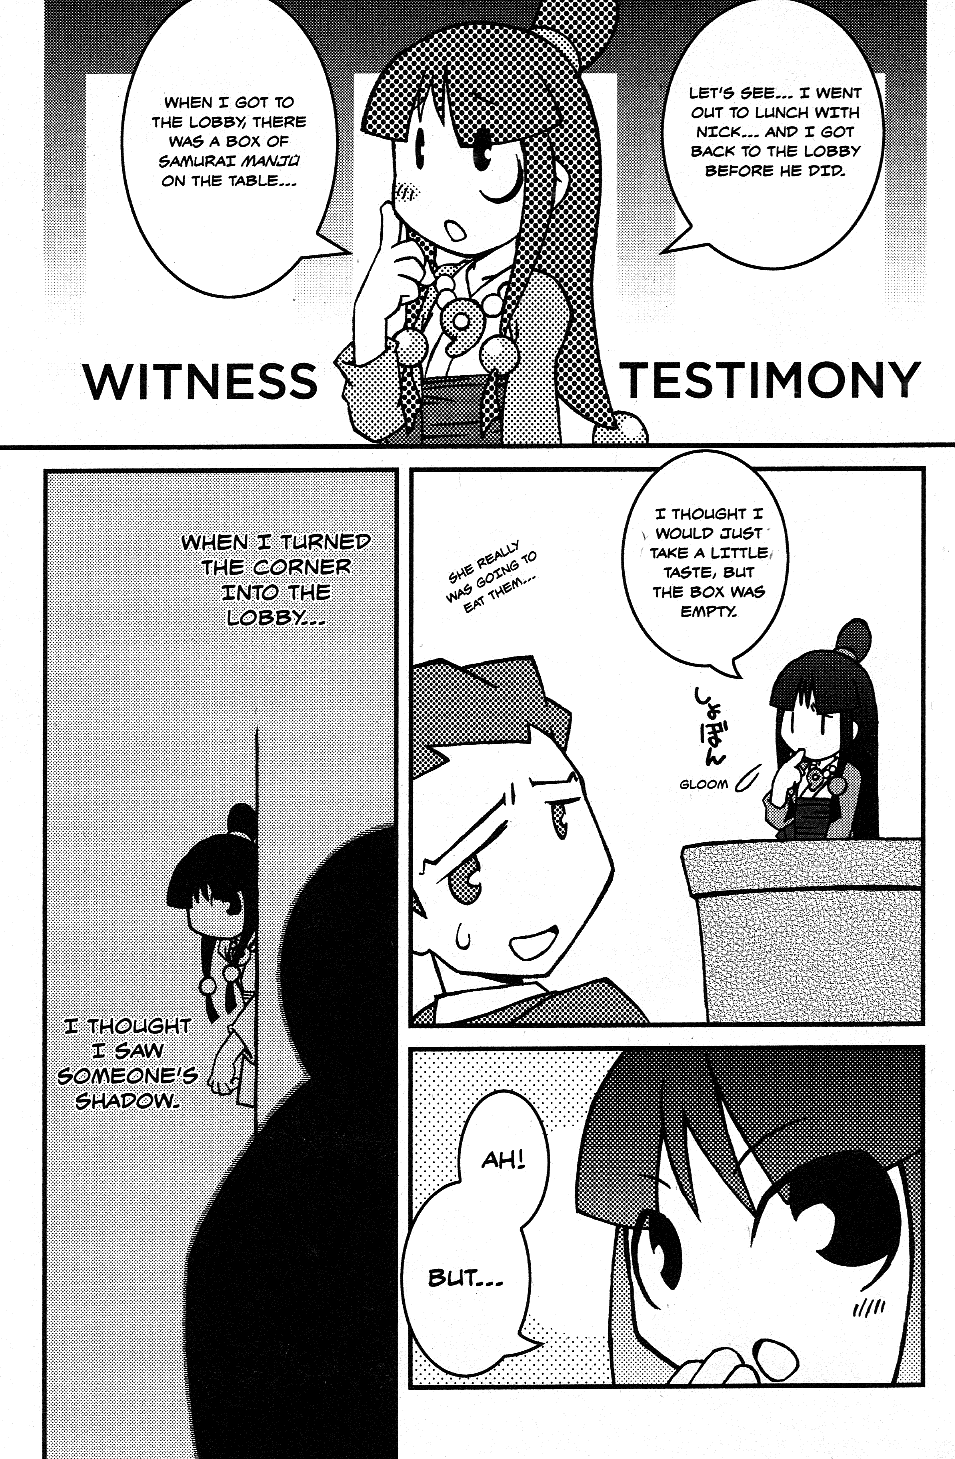 Phoenix Wright: Ace Attorney - Official Casebook Vol.1 Chapter 18: The Mystery Of The Missing Manjû - By Tsukapon - Picture 3